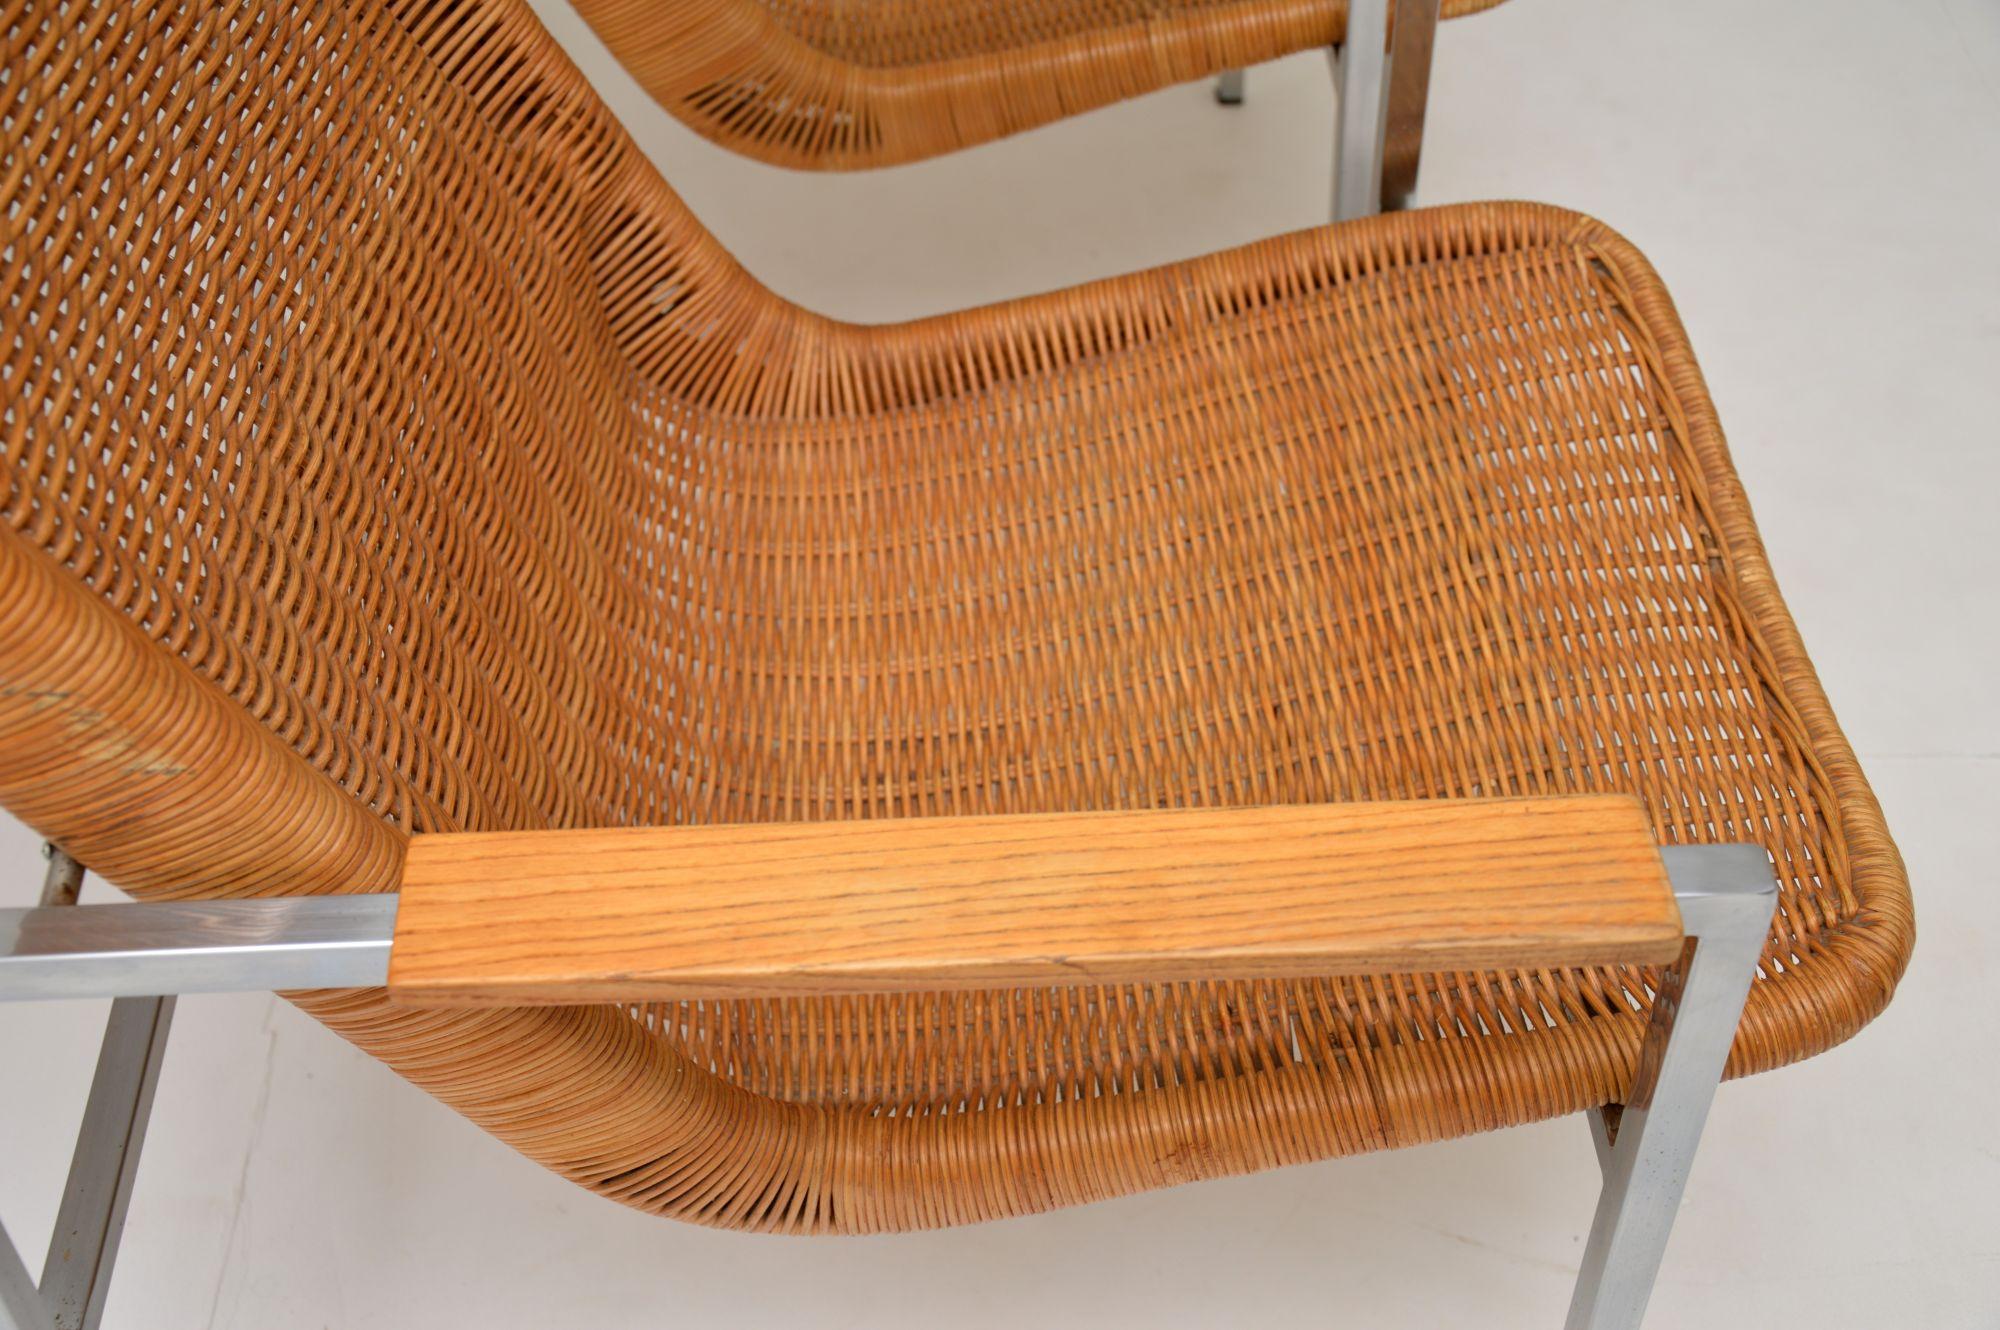 Pair of Vintage Chrome and Rattan Armchairs by Dirk Van Sliedrecht For Sale 4